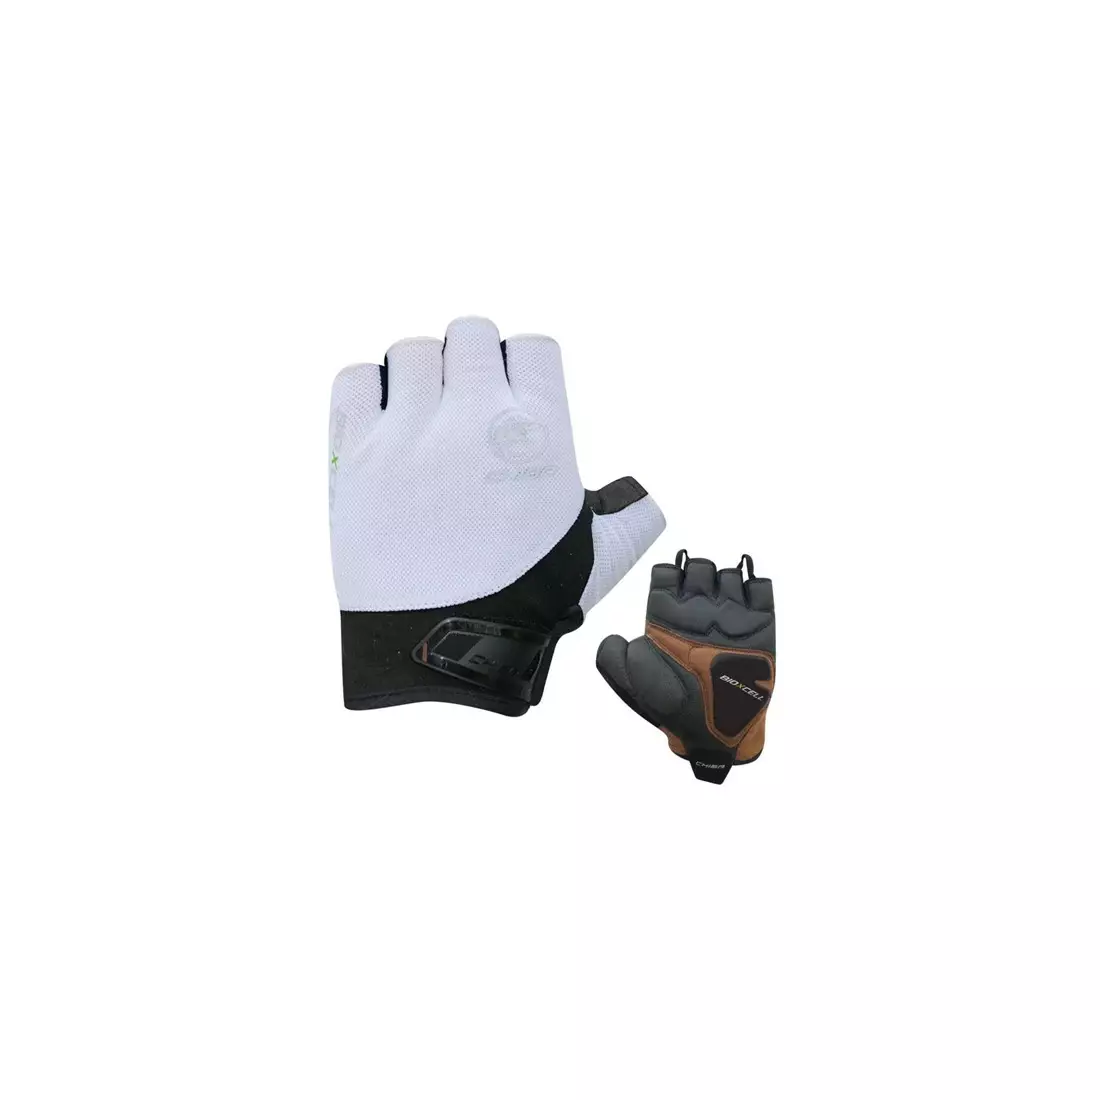 CHIBA BIOXCELL ROAD cycling gloves, black and white